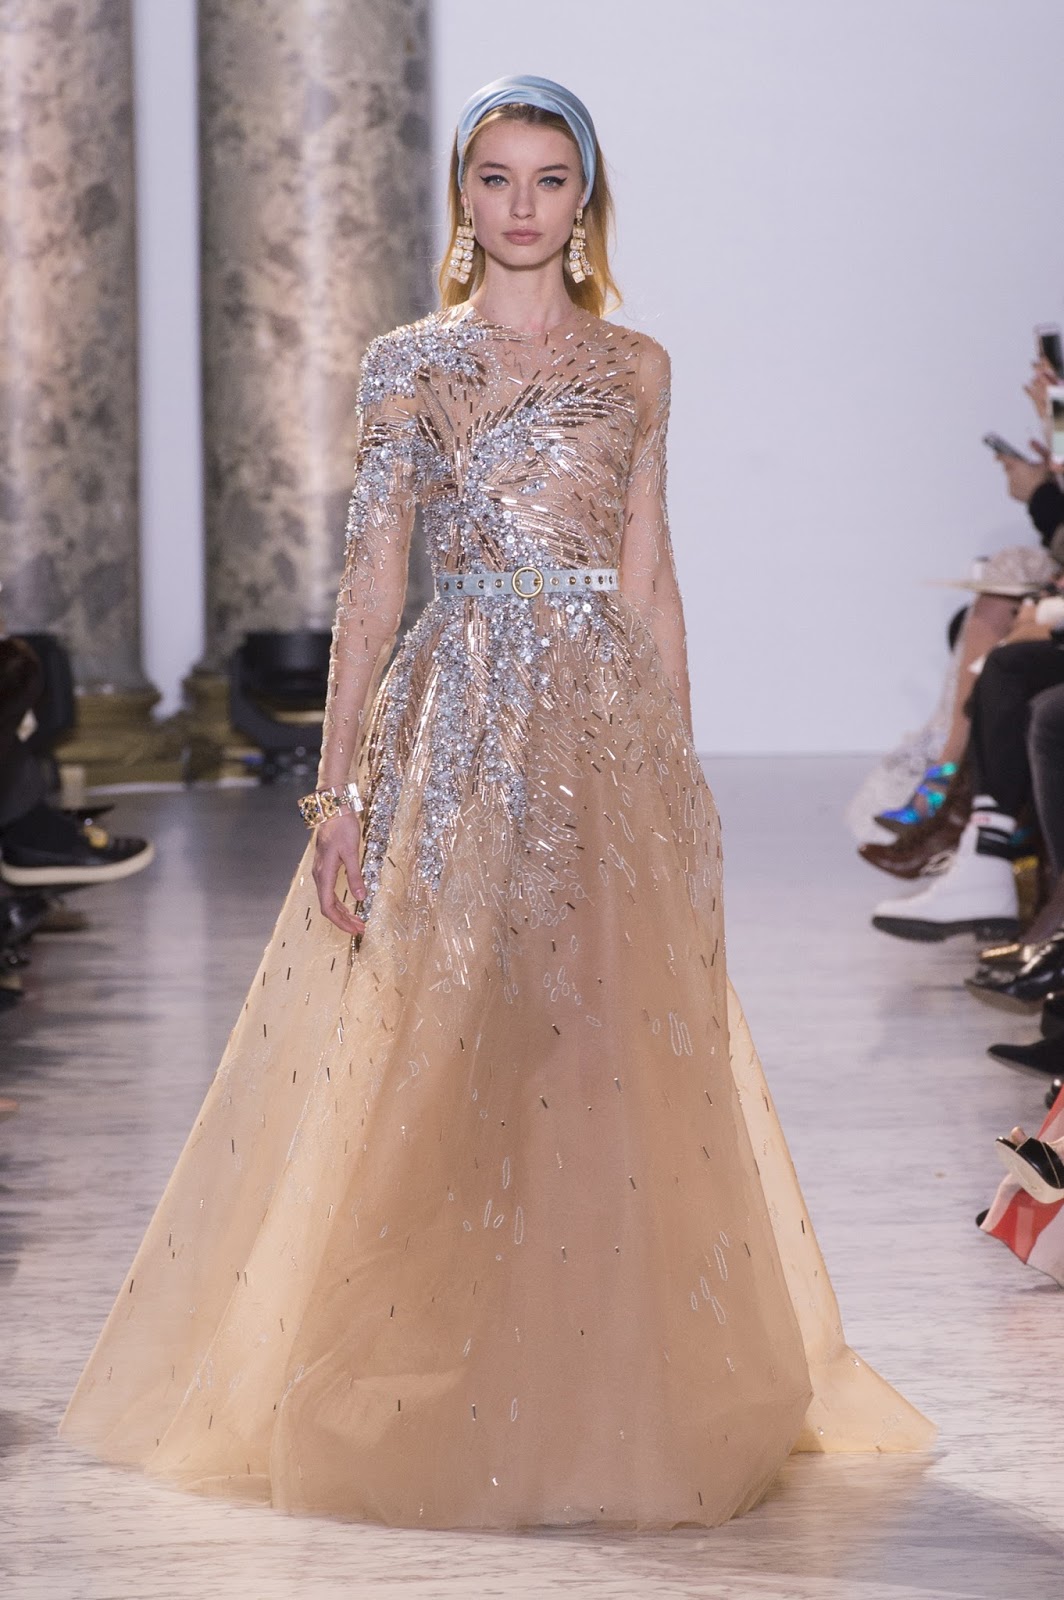 Simply Stunning: Elie Saab Haute Couture